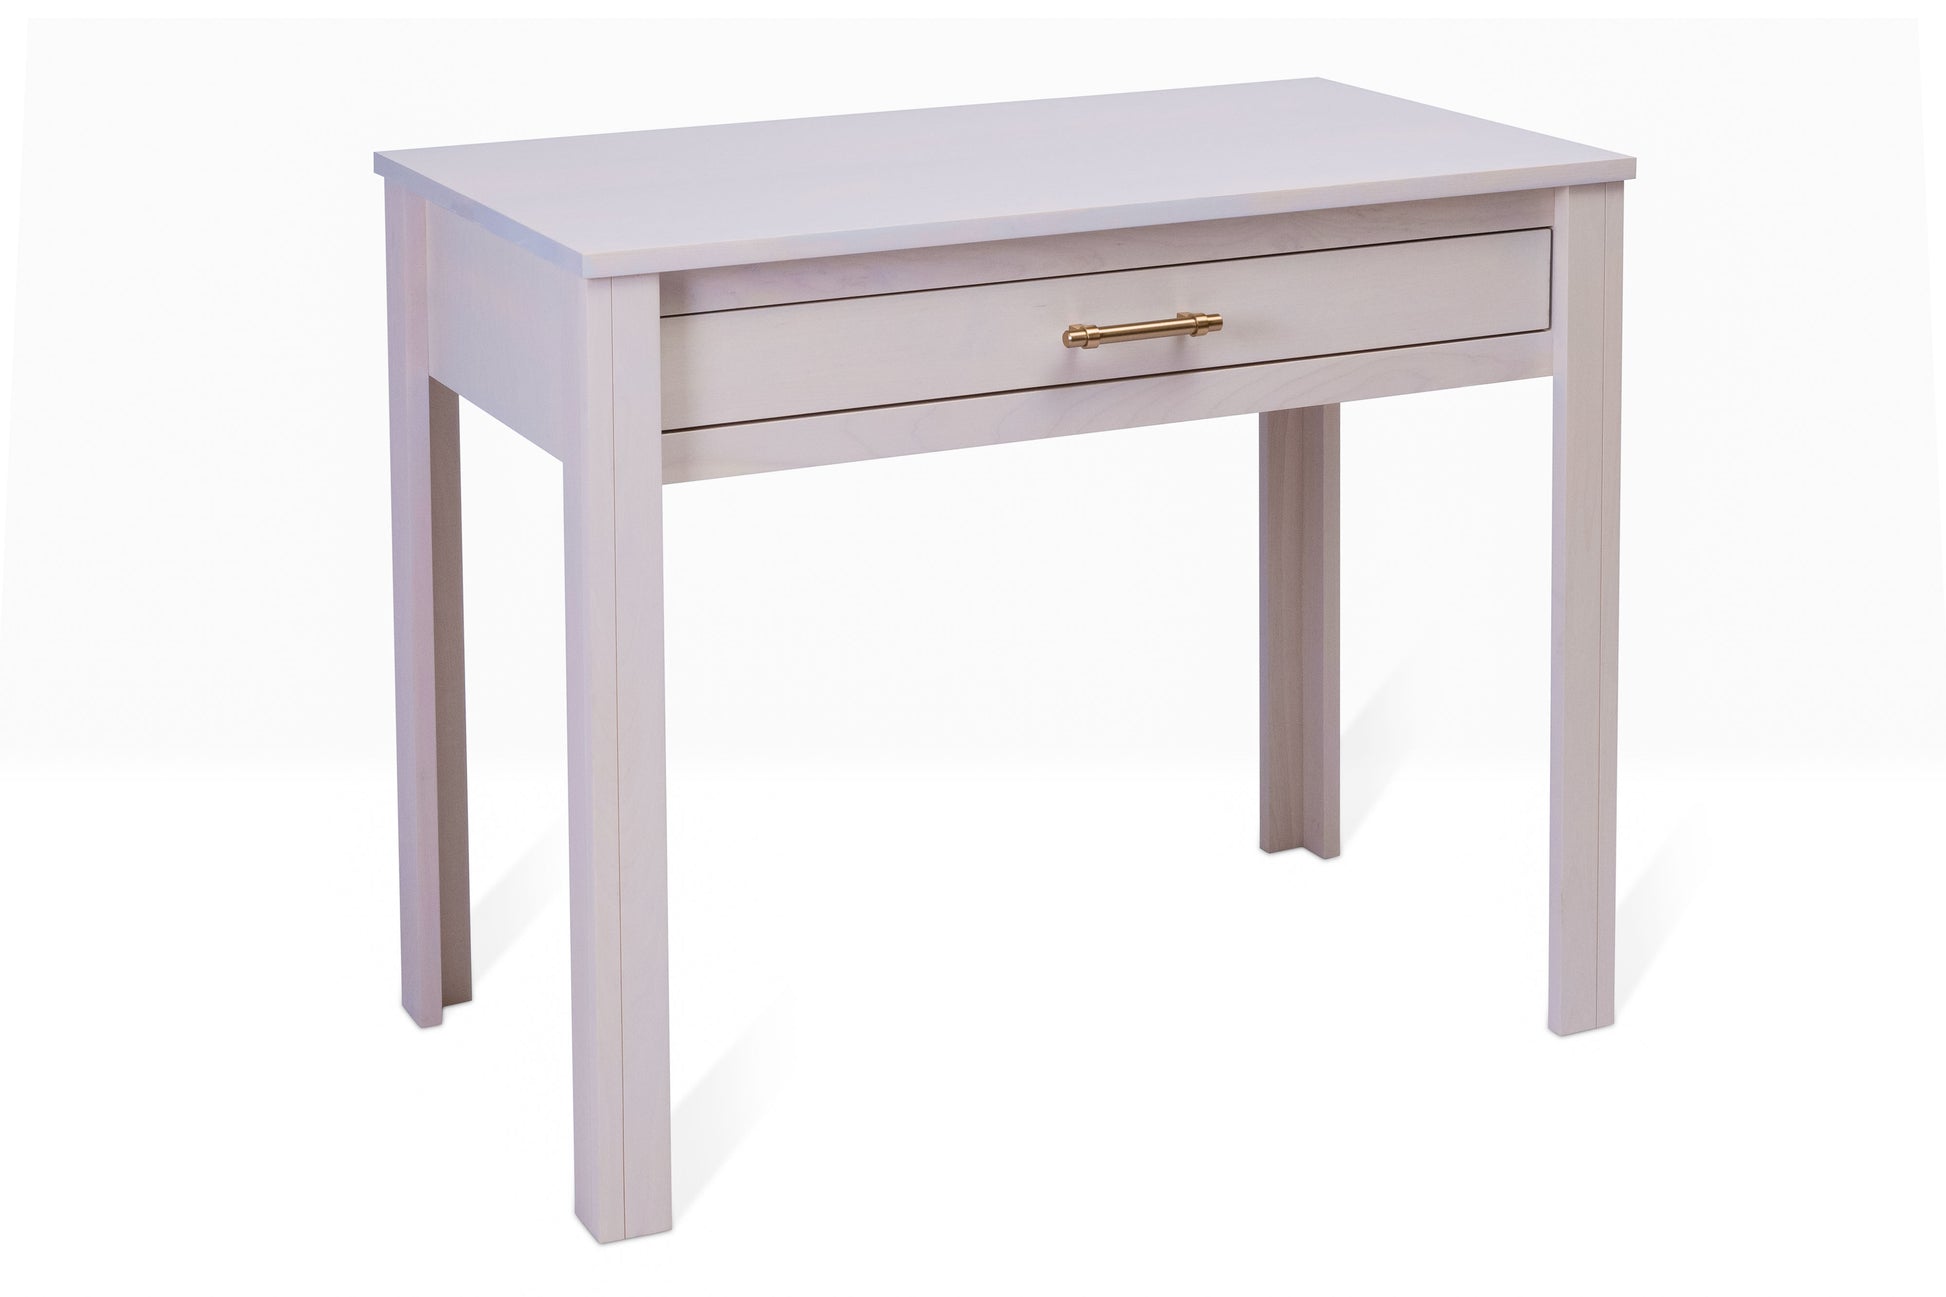 Acadia Tremont Writing Desk is built in birch and features one large drawer. Shown in Sandstone finish.